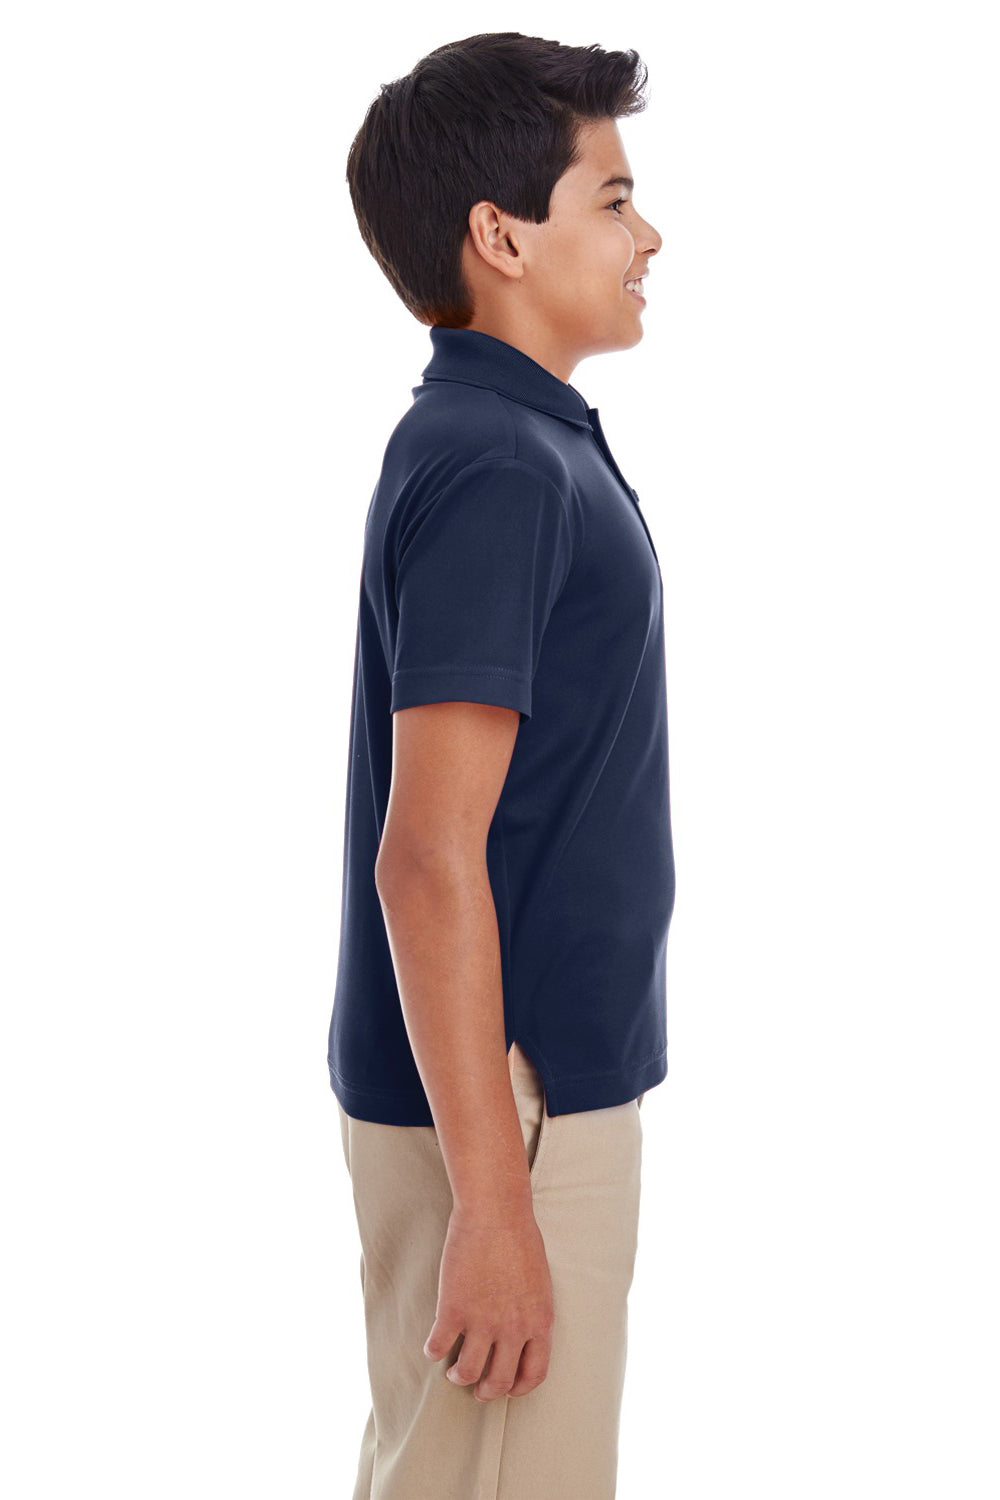 Core 365 88181Y Youth Origin Performance Moisture Wicking Short Sleeve Polo Shirt Navy Blue Side